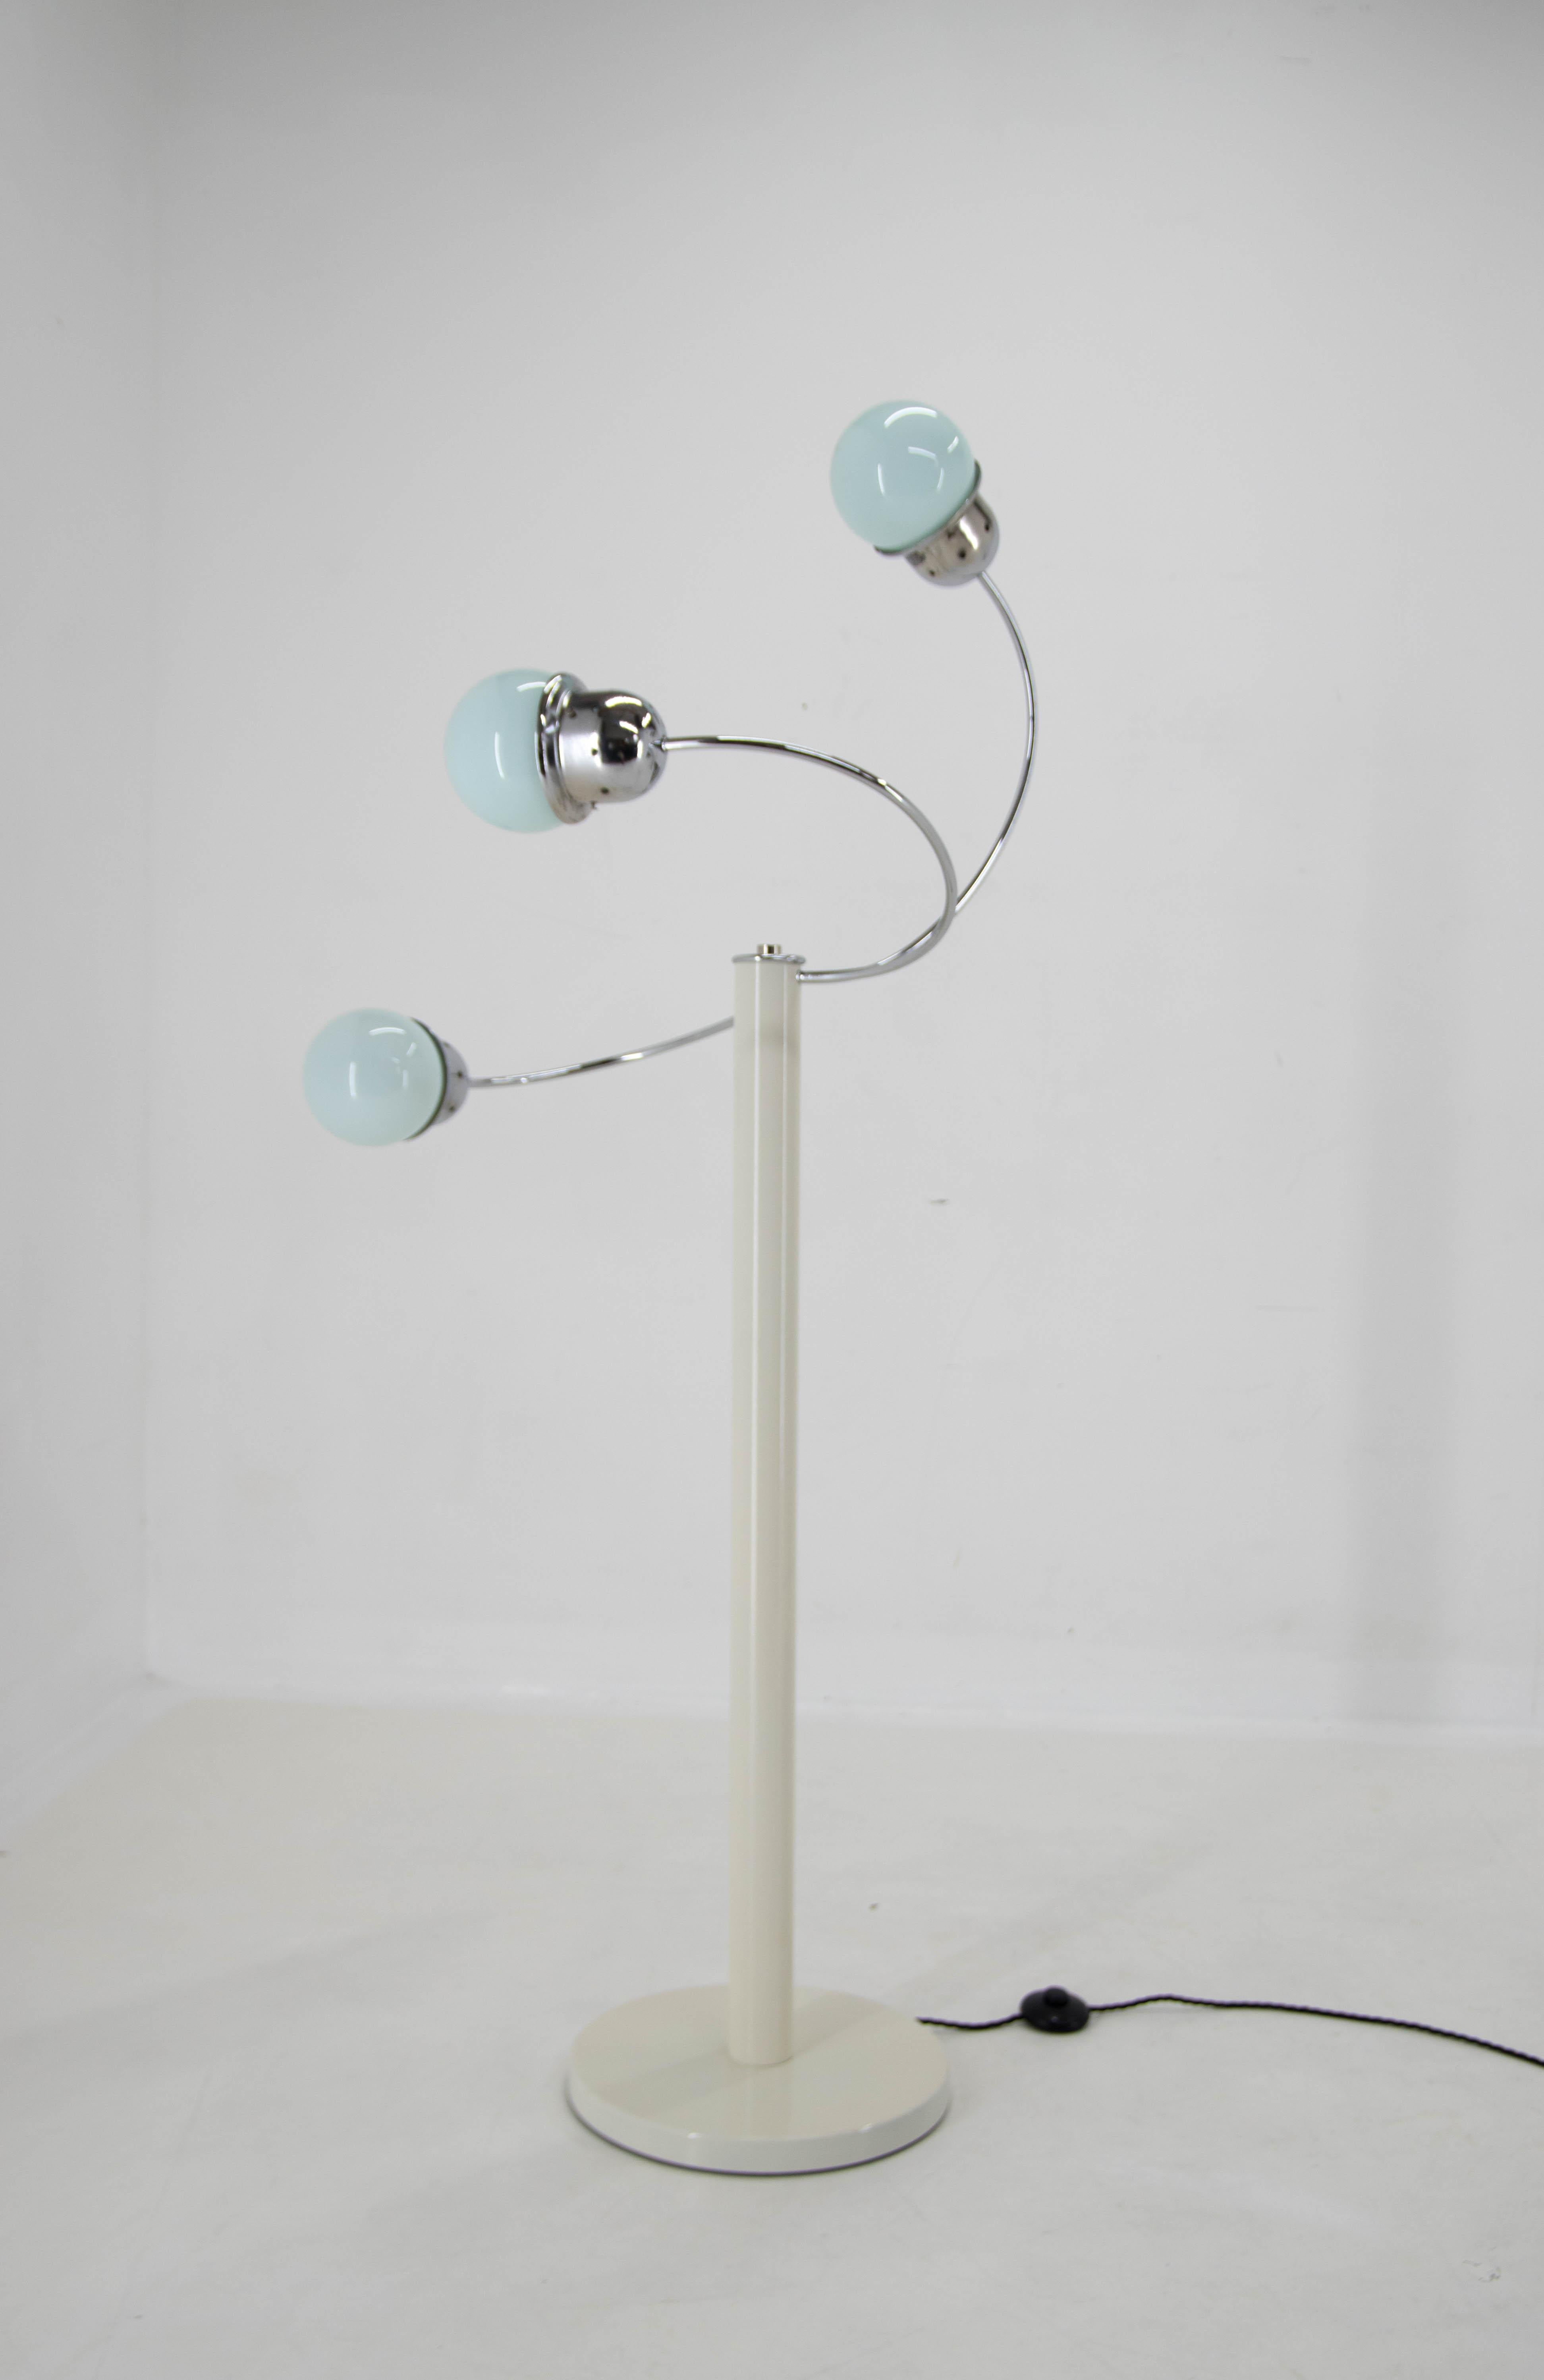 Space Age floor lamp made in Italy in 1960s.
White metal base with new paint.
Three chrome arms with age patina.
Light blue blown glass shades
Rewired: 3x40W, E12-E14 bulbs
US plug adapter included
